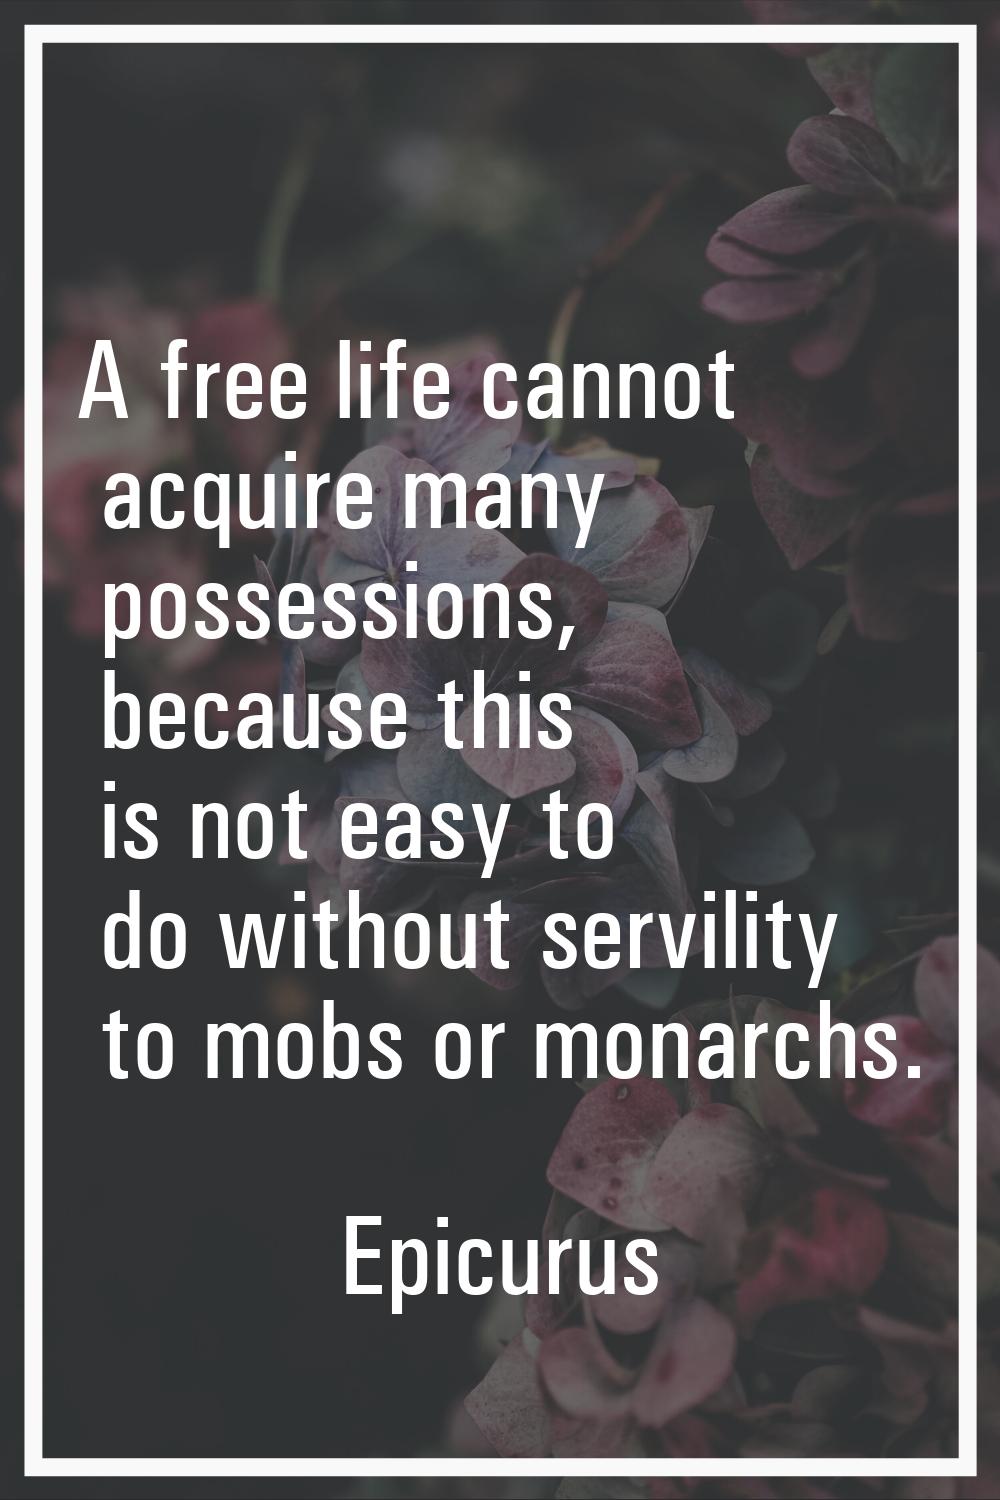 A free life cannot acquire many possessions, because this is not easy to do without servility to mo